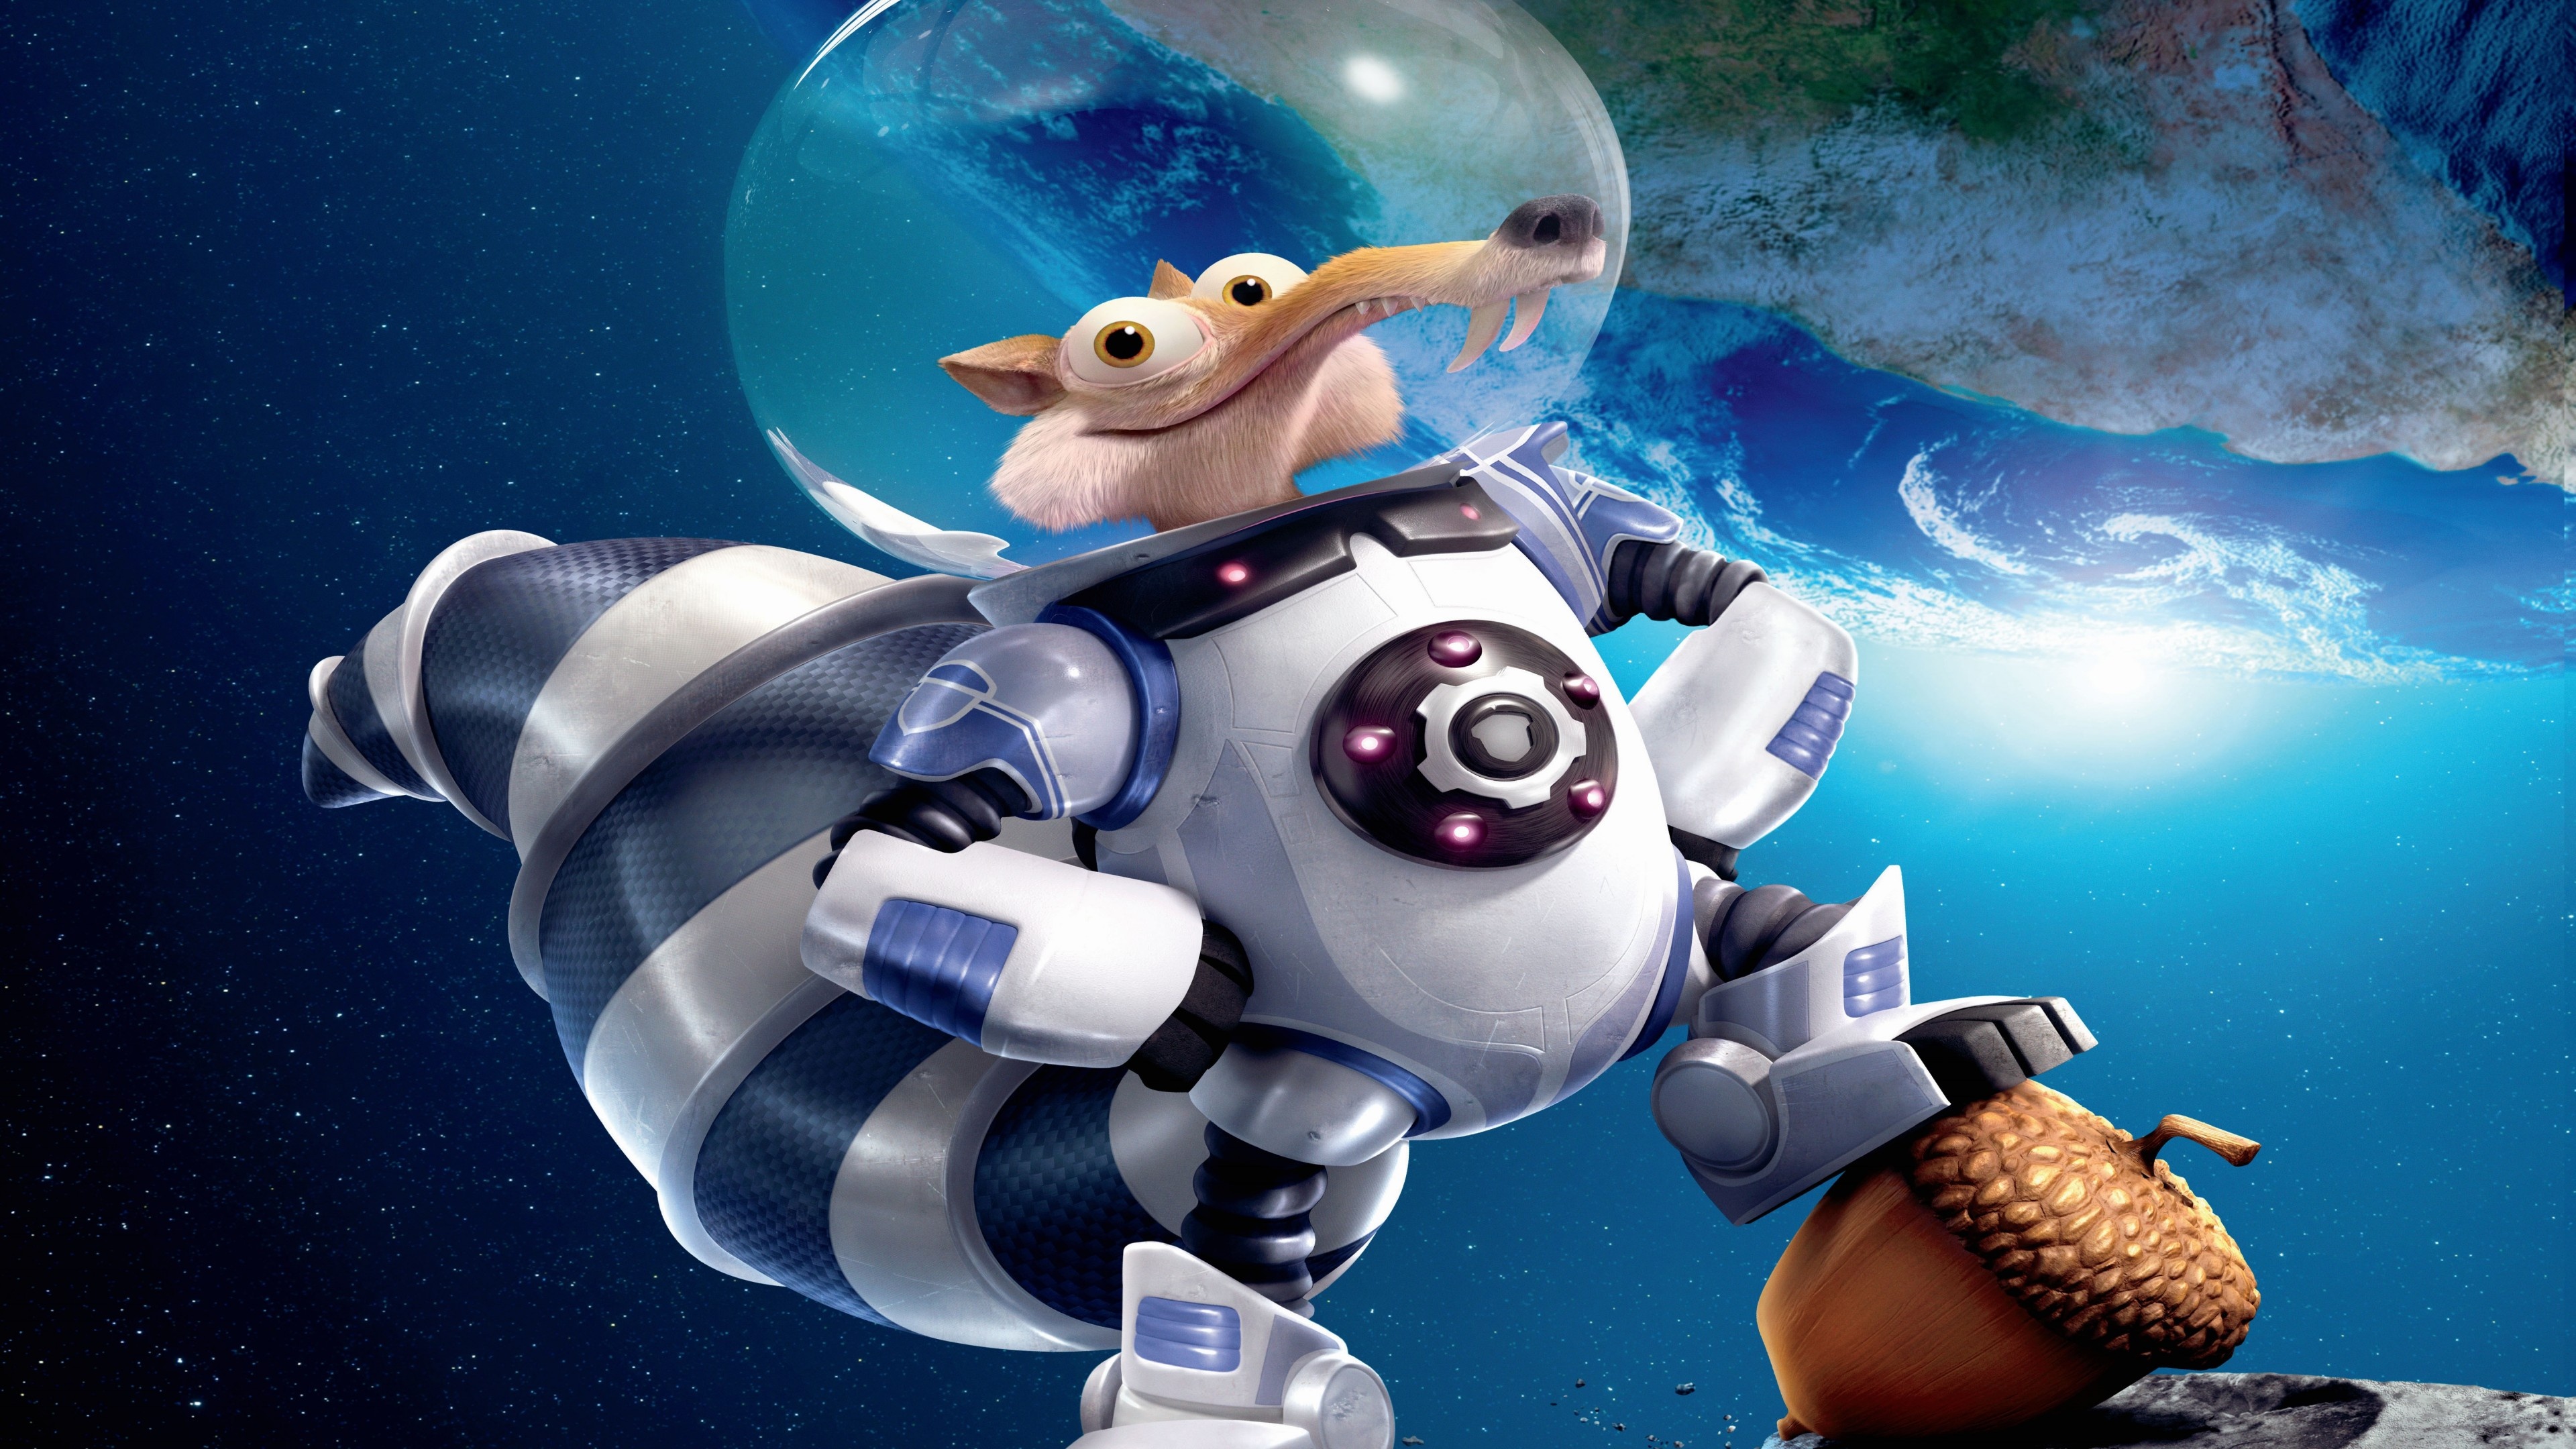 Ice Age 5 collision course, Sid and the squirrel, Best animations of 2016, Space movies, 3840x2160 4K Desktop